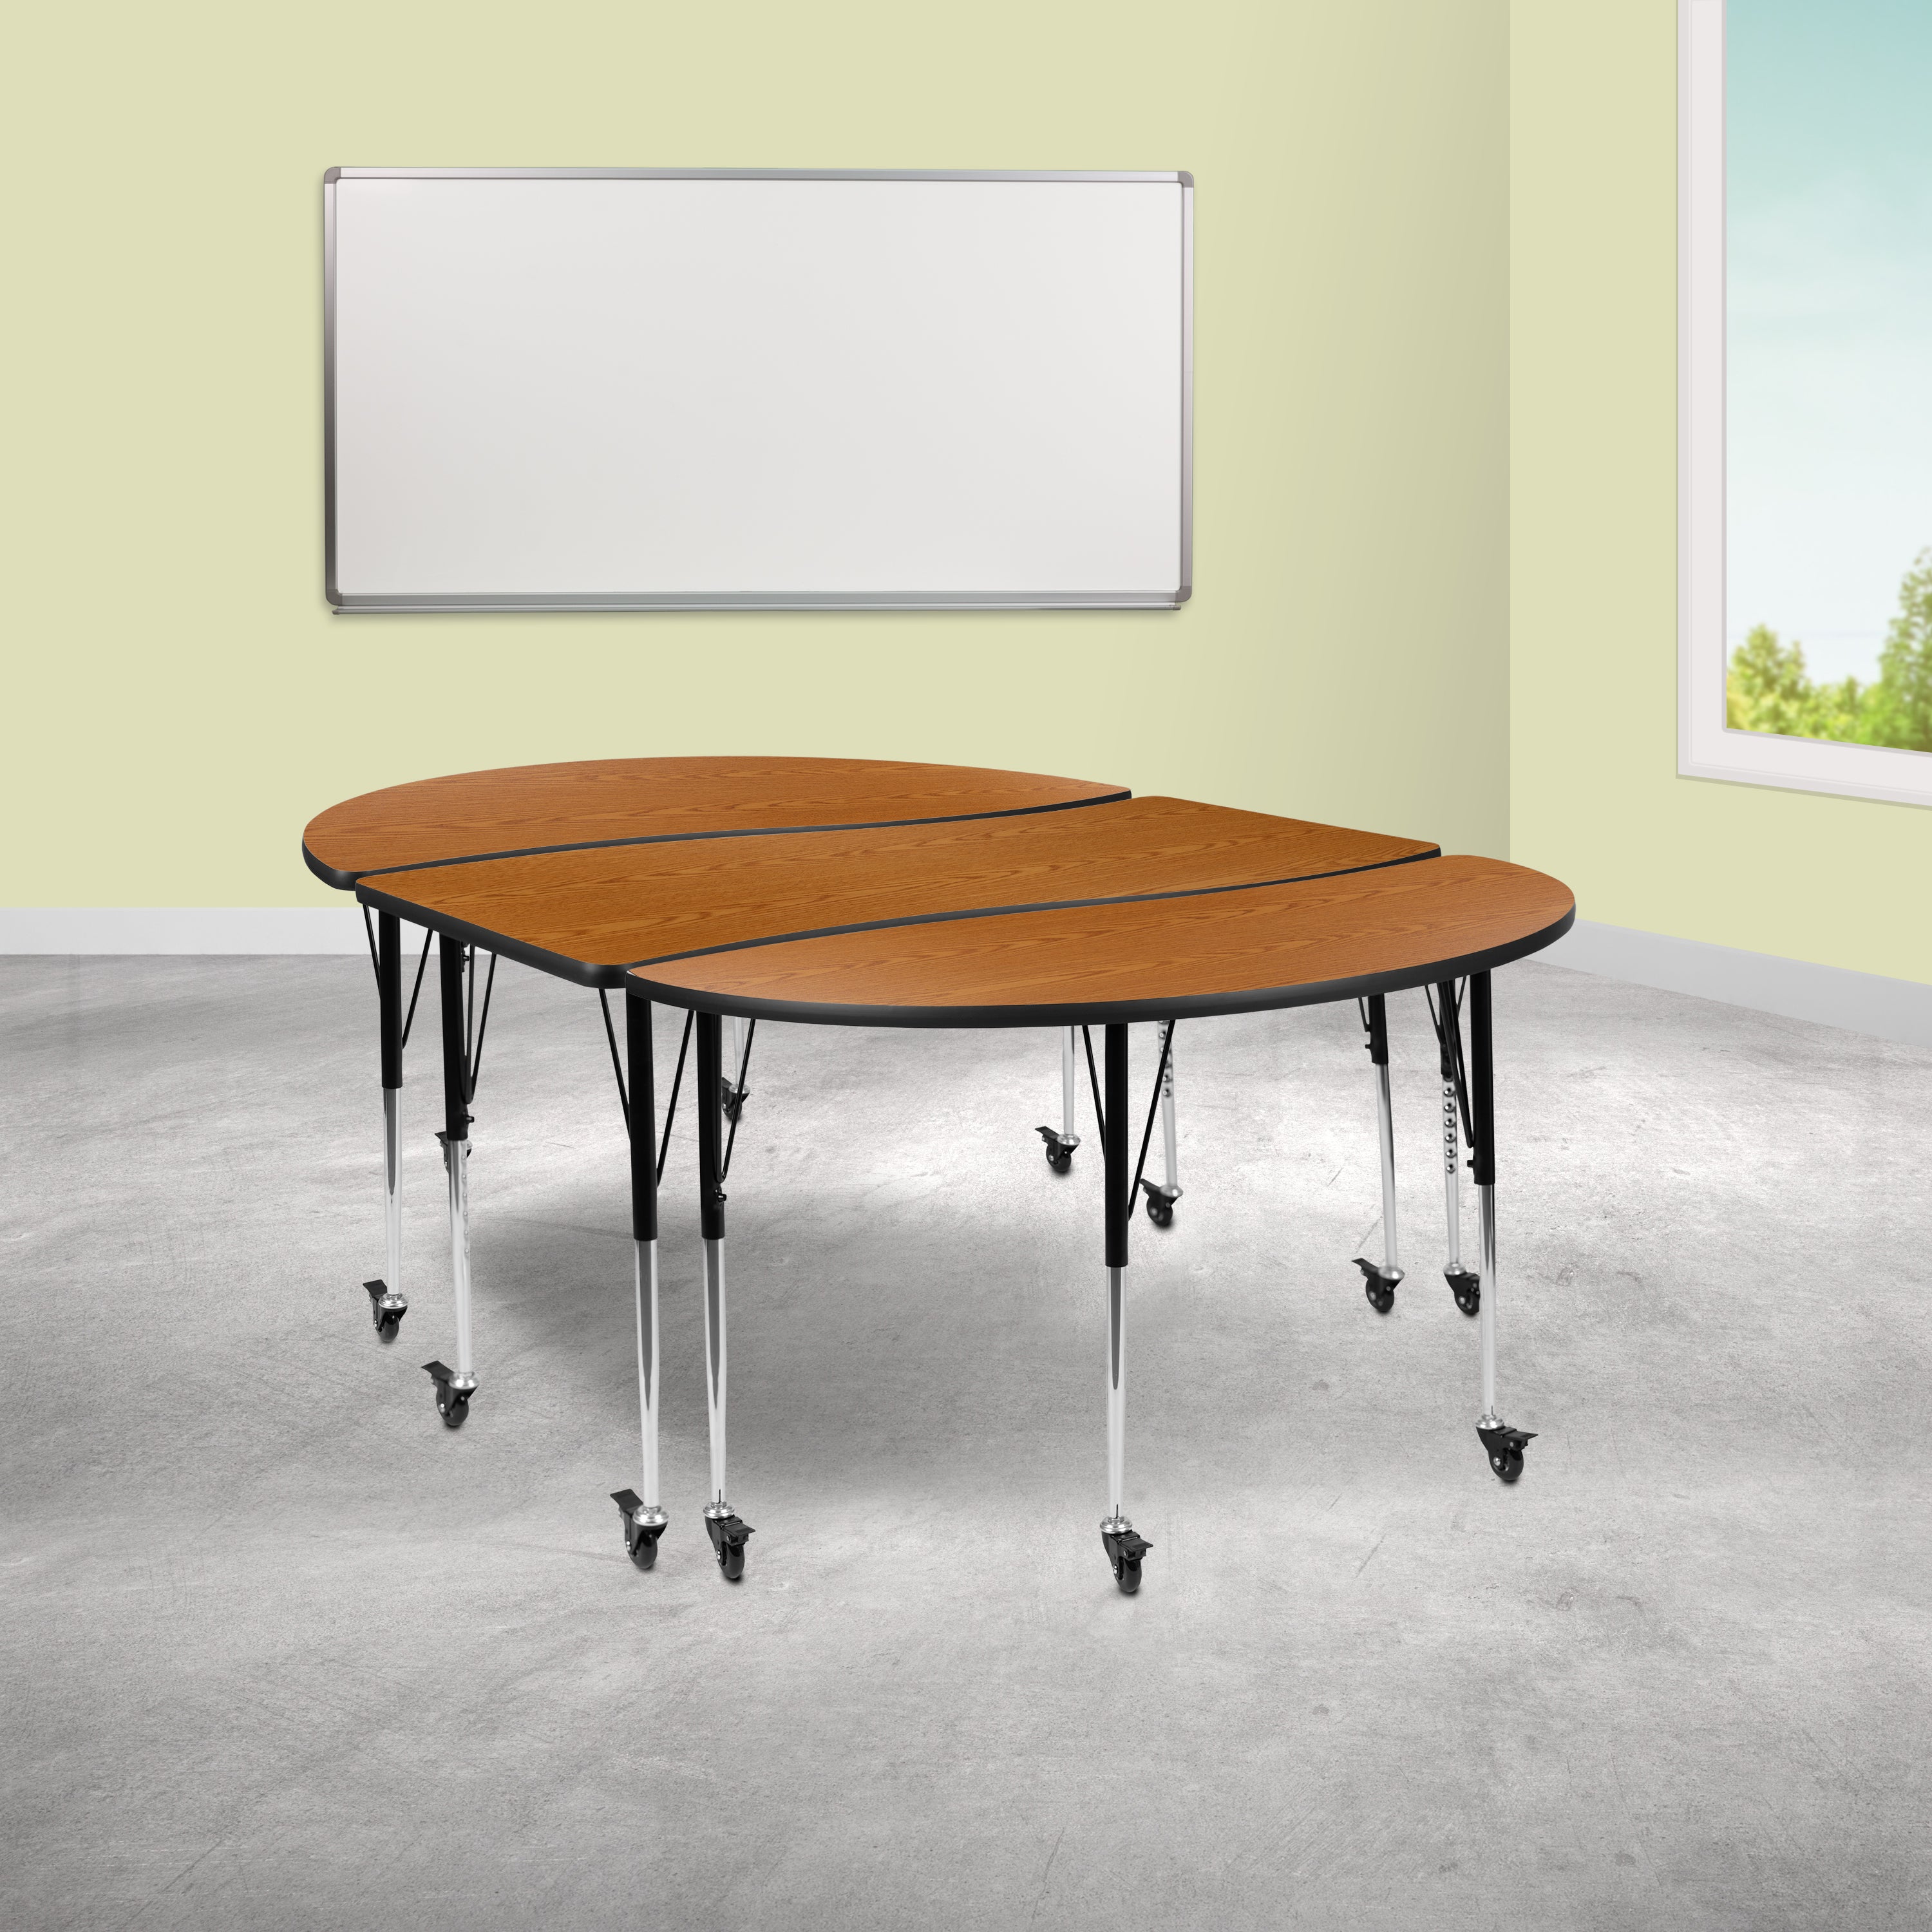 3 Mobile Piece 86" Oval Wave Flexible Grey Thermal Laminate Activity Table Set - Standard Height Adjustable Legs-Collaborative Activity Table Set-Flash Furniture-Wall2Wall Furnishings